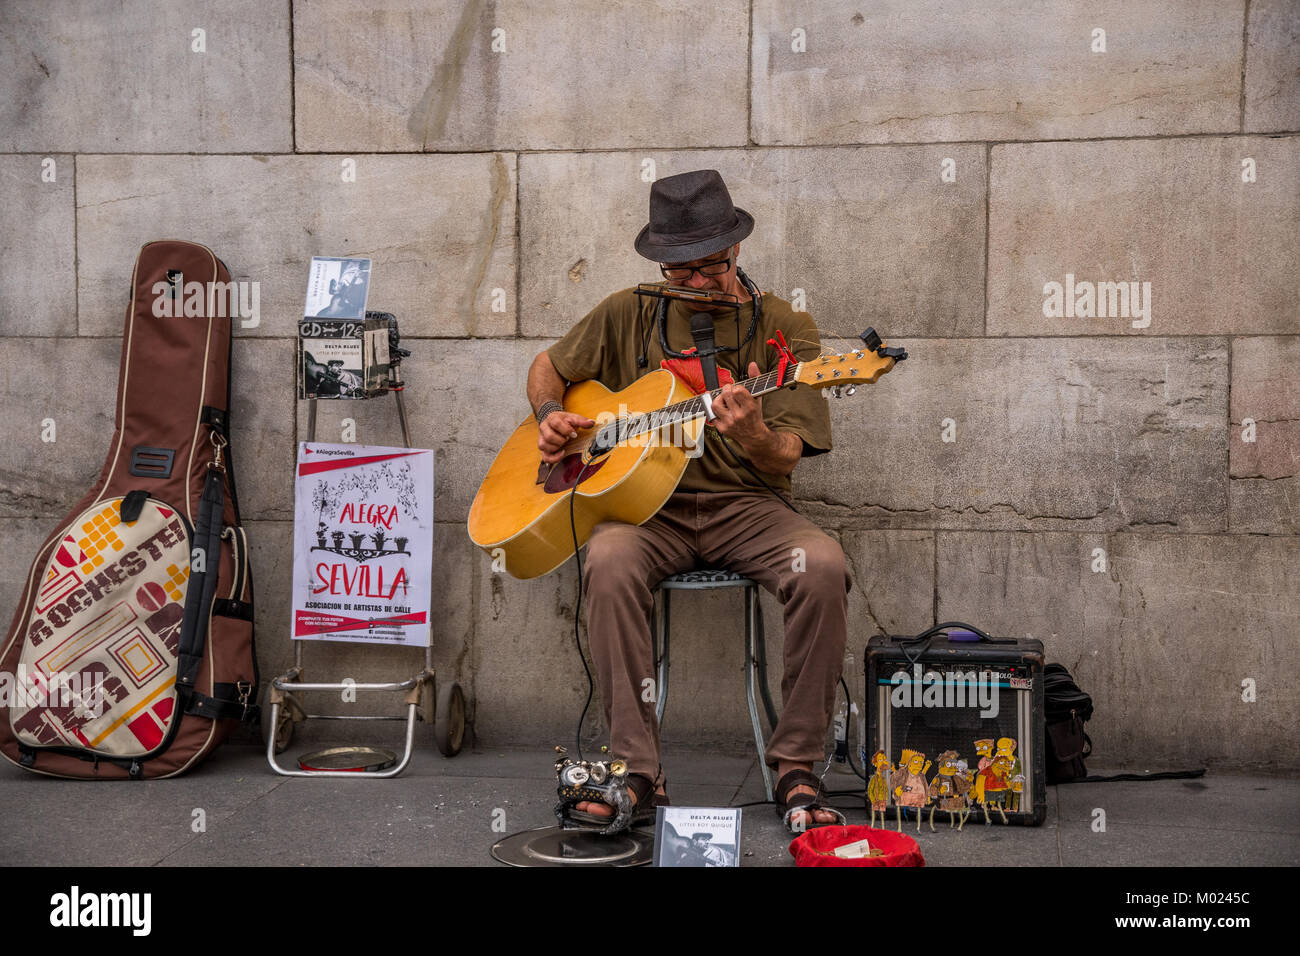 SEVILLE, ANDALUSIA / SPAIN - OCTOBER 13 2017: STREET GUITAR PLAYER Stock Photo